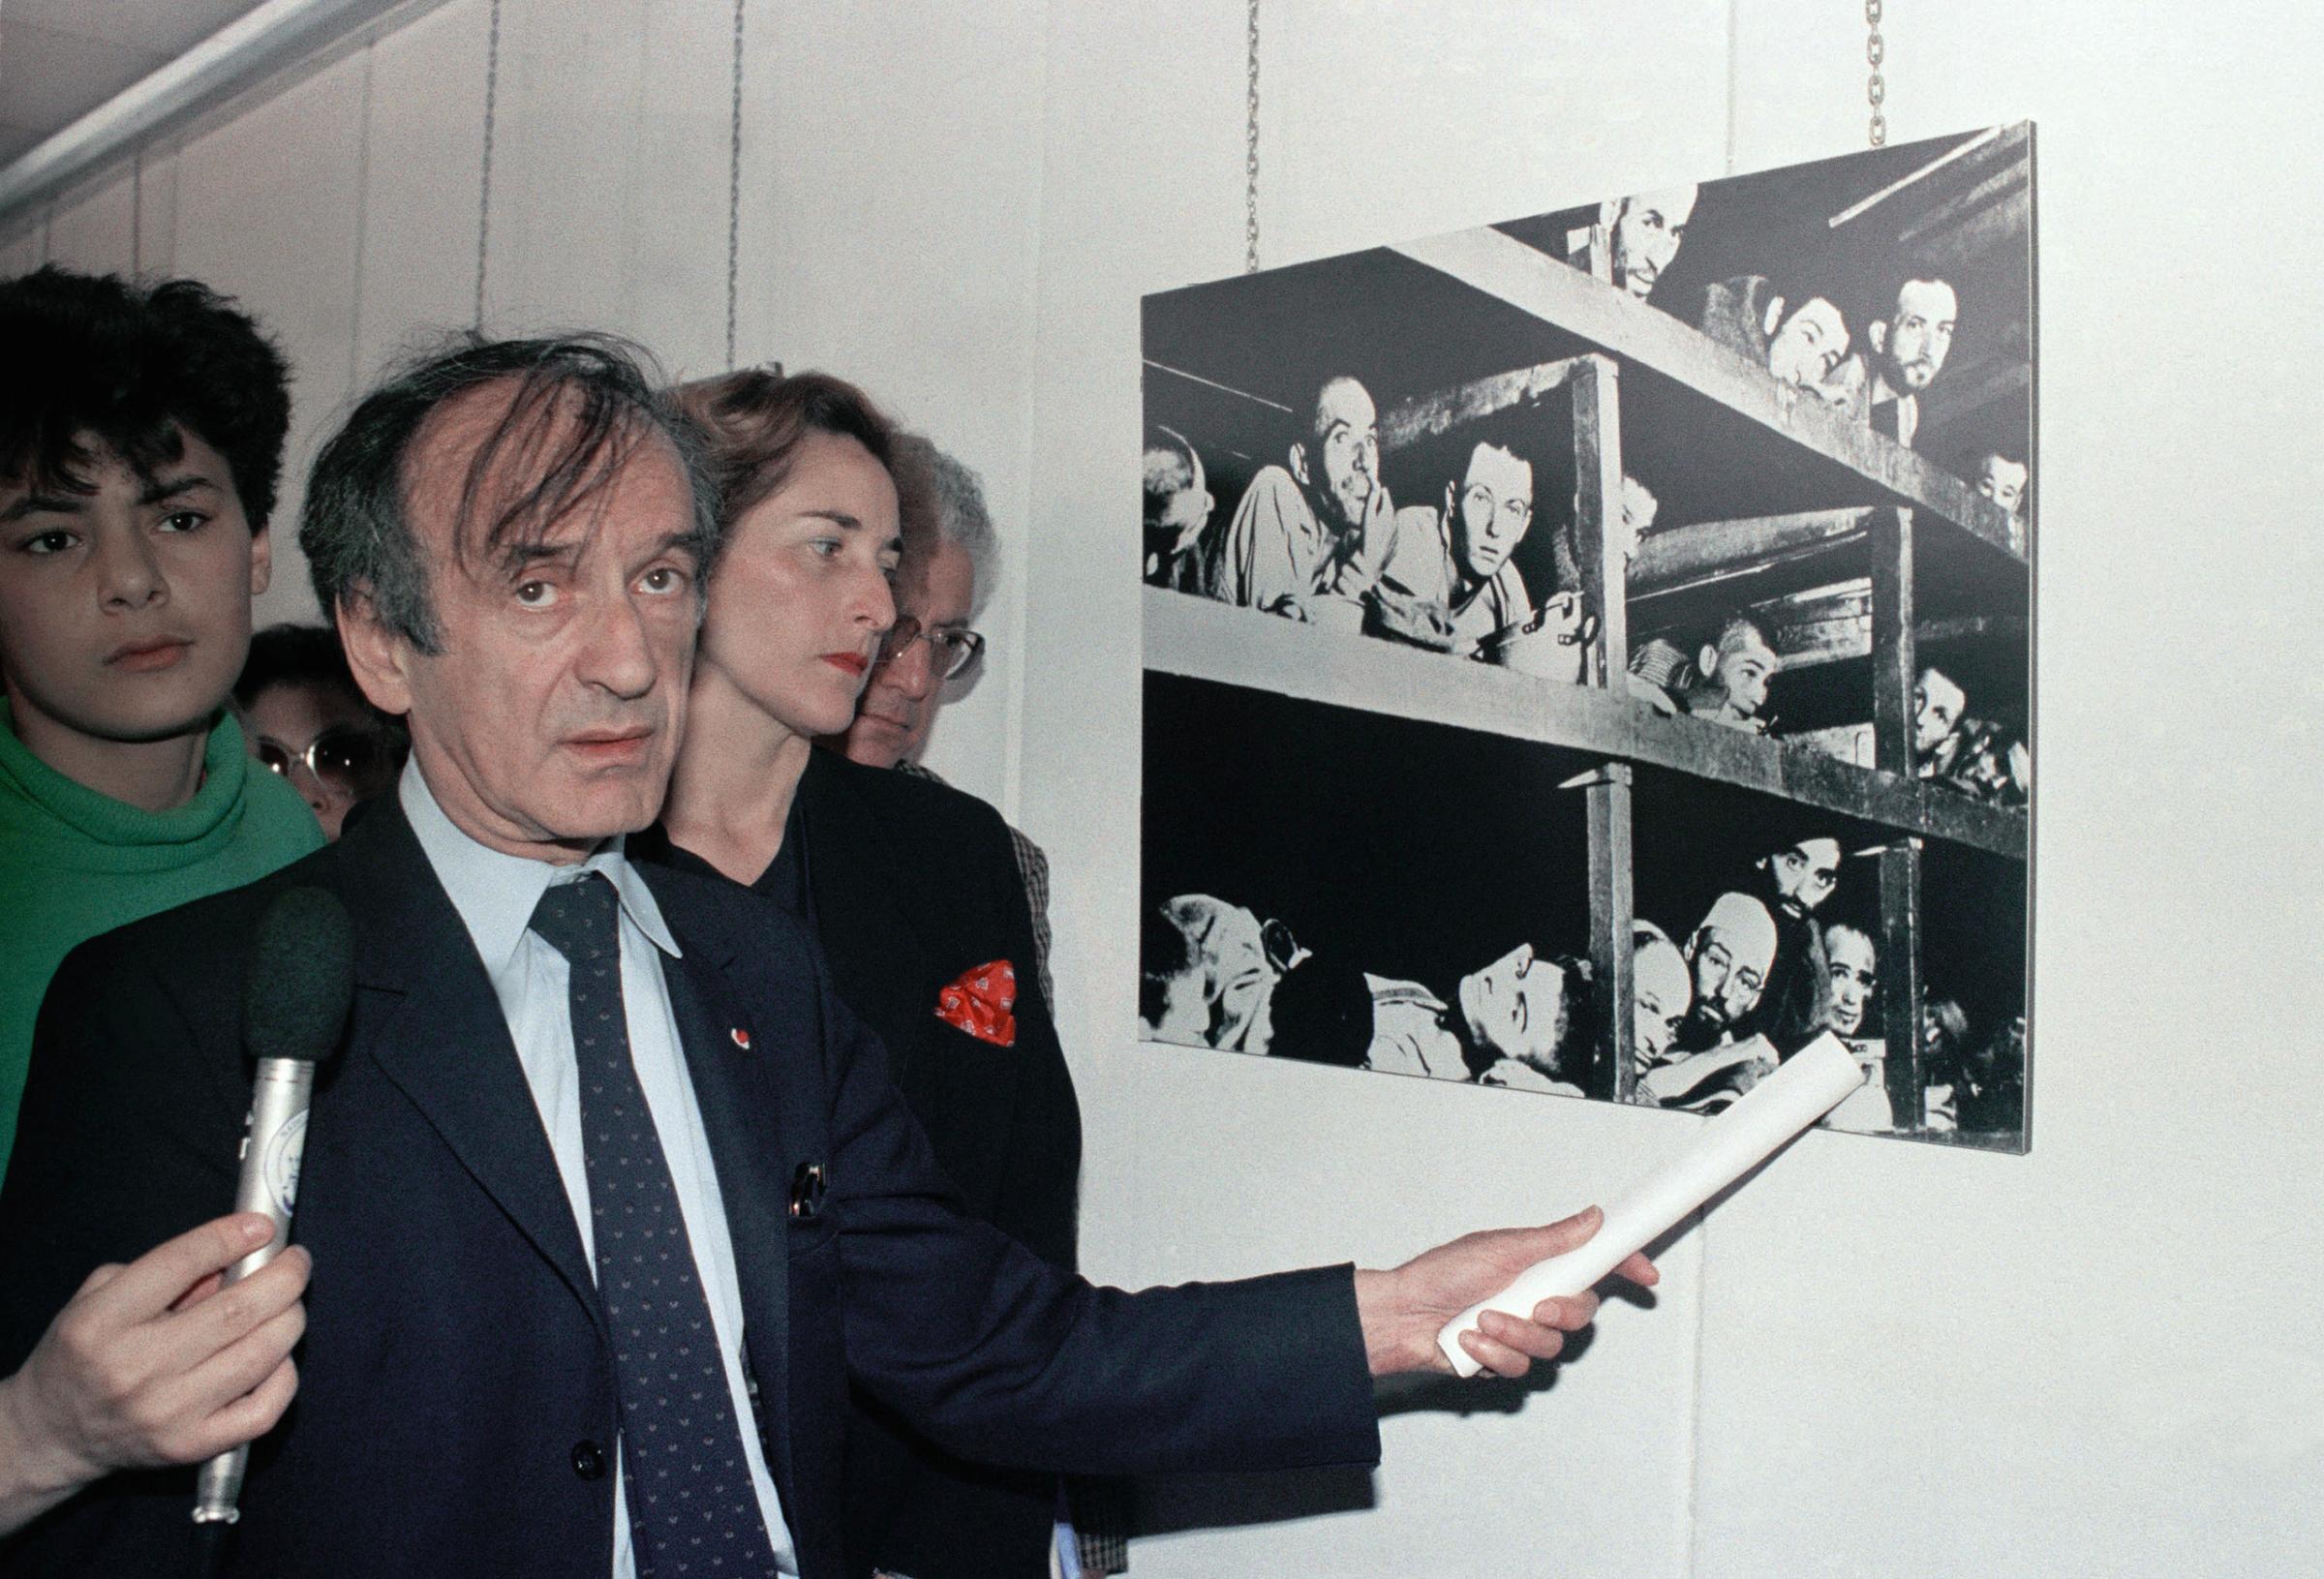 Elie Wiesel, winner of the 1986 Nobel Peace Prize, points to himself in a photo of prisoners at the Buchenwald concentration camp a few days after U.S. troops liberated it, at the Holocaust Memorial in Lyon, France, on June 2, 1987.